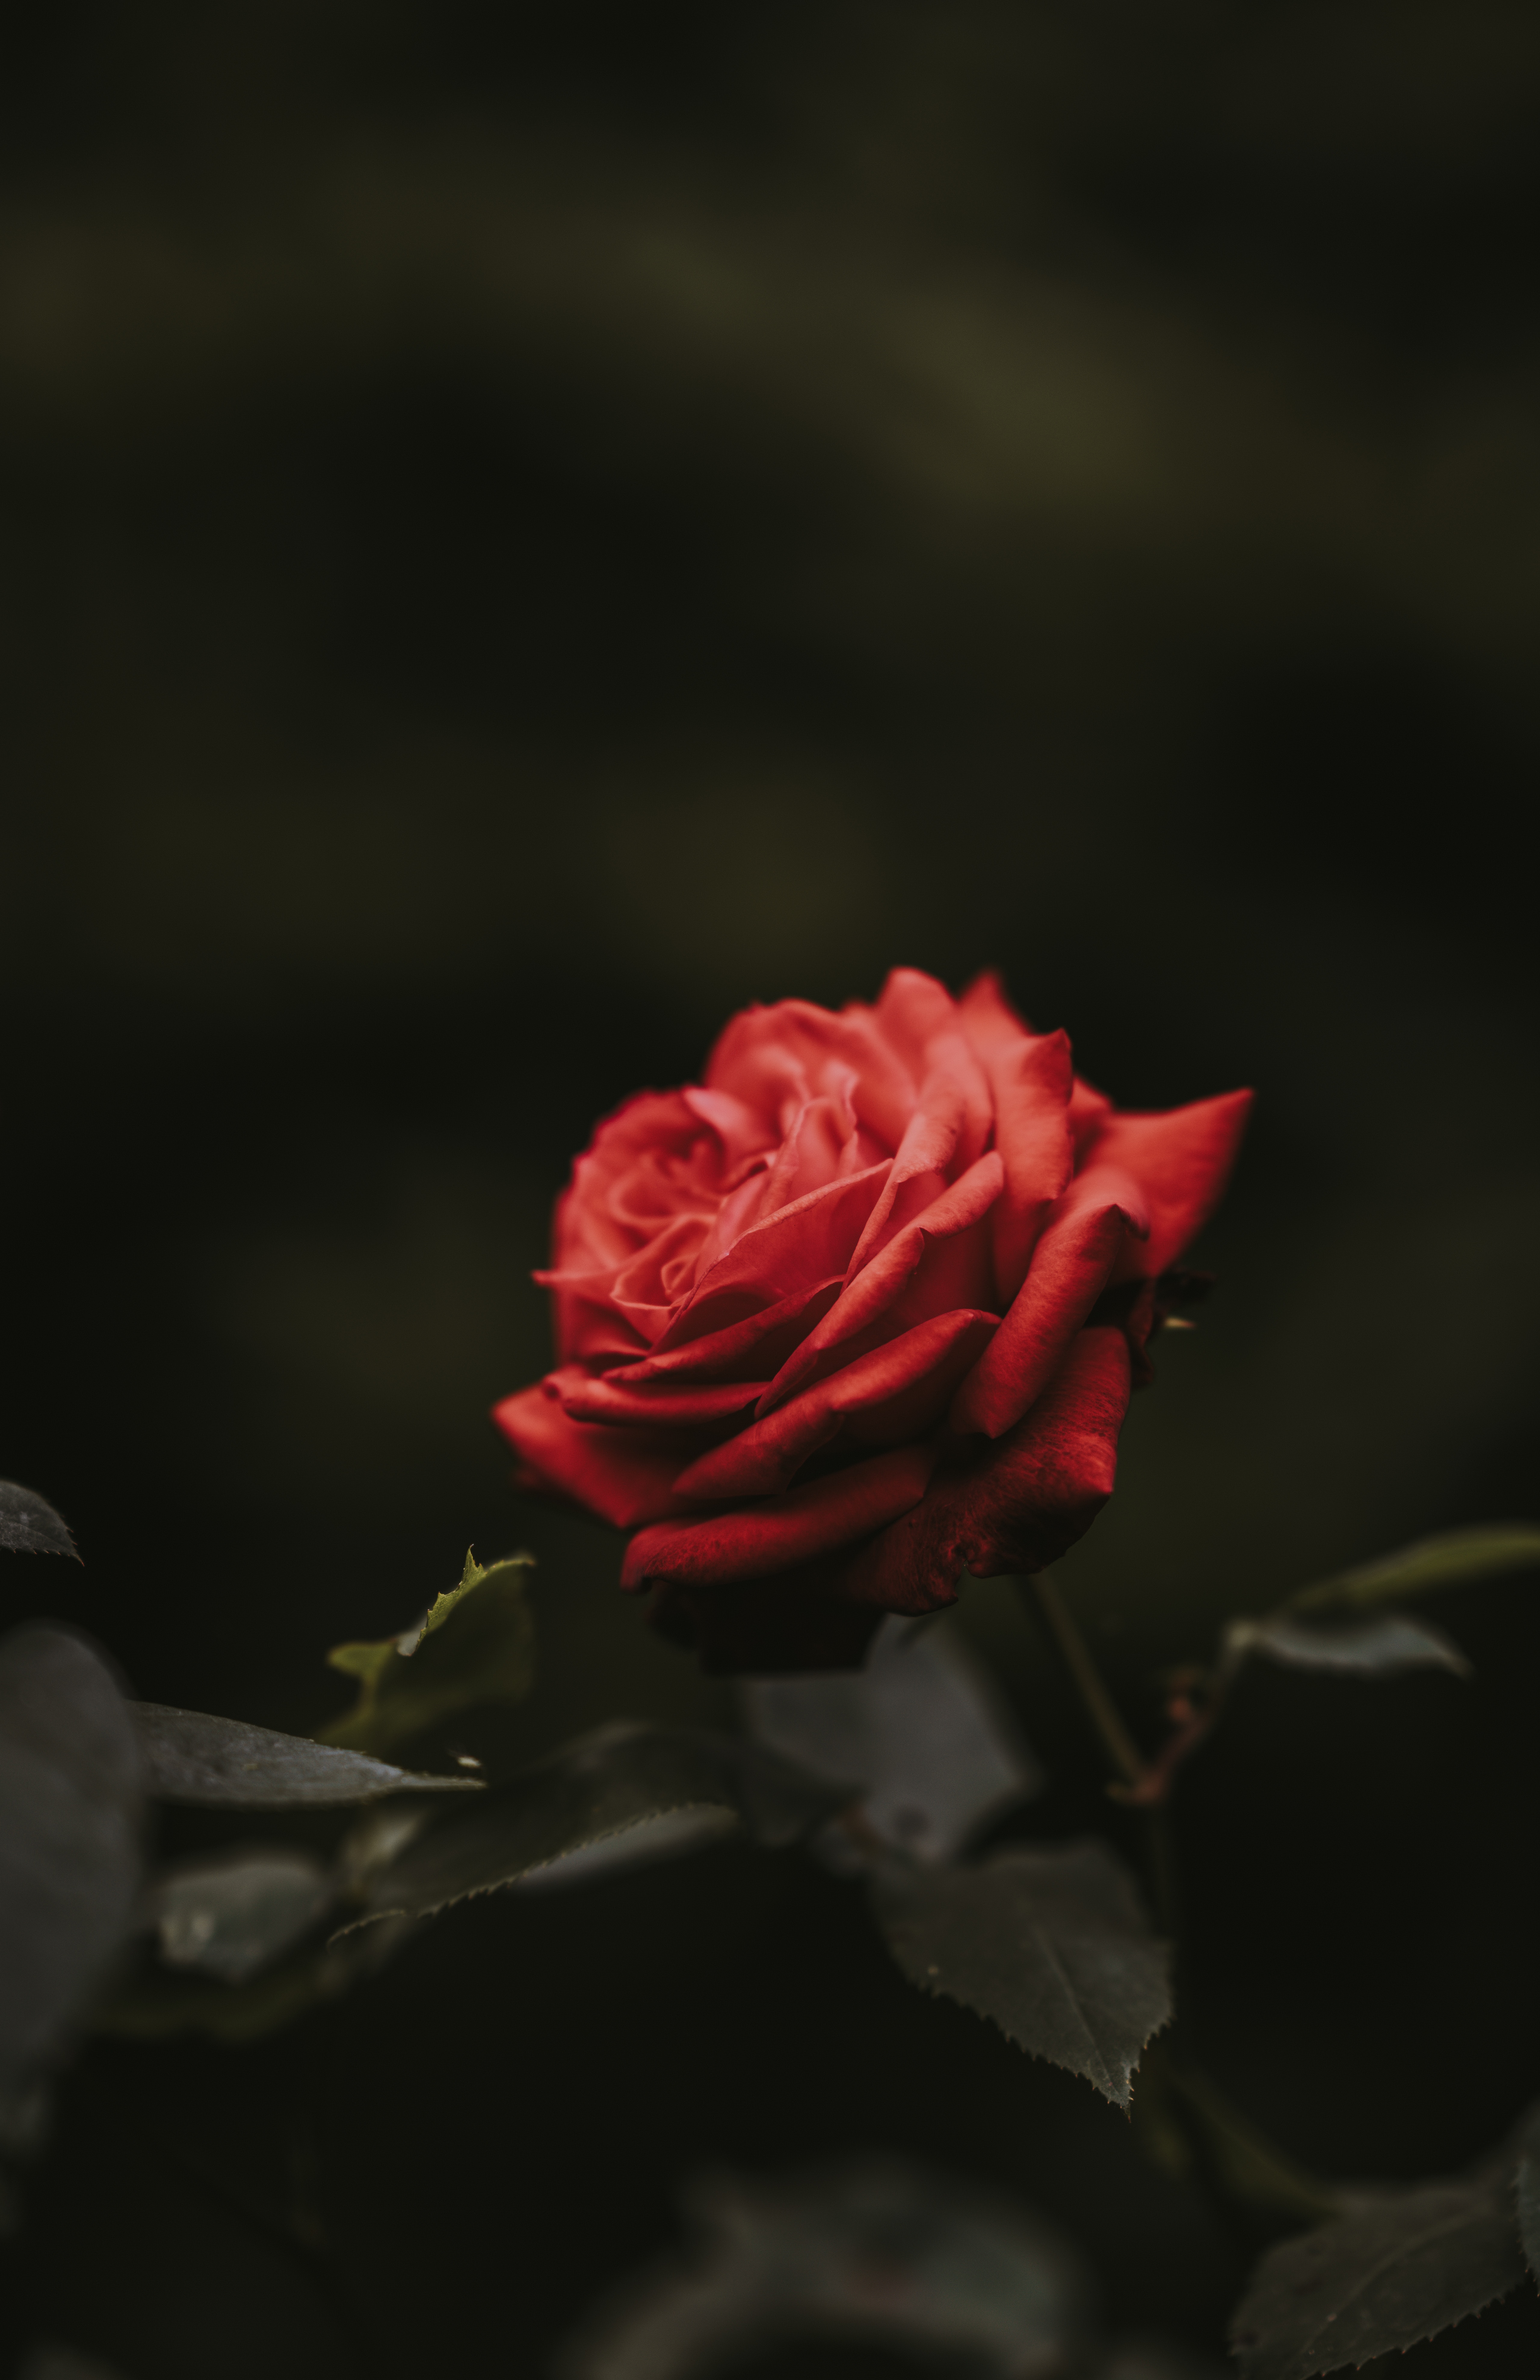 rose flower, flowers, red, flower, rose, bud, blur, smooth lock screen backgrounds